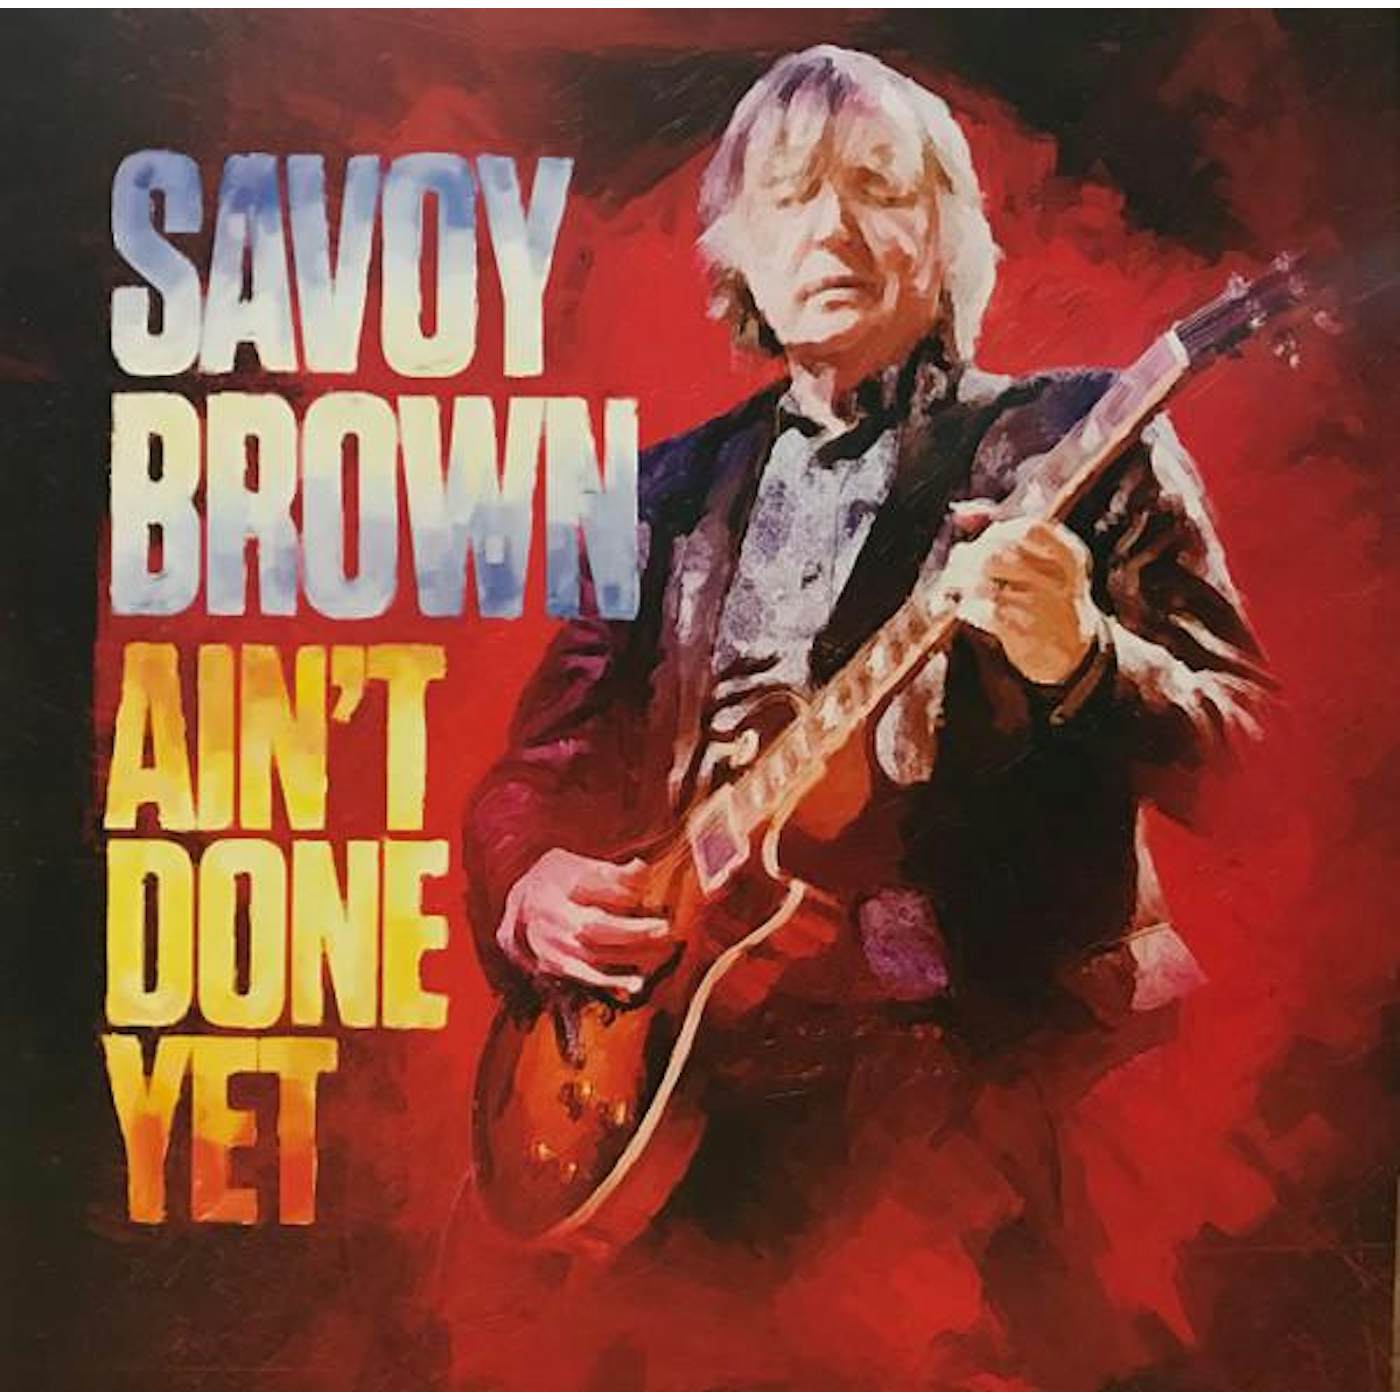 Savoy Brown AIN'T DONE YET Vinyl Record